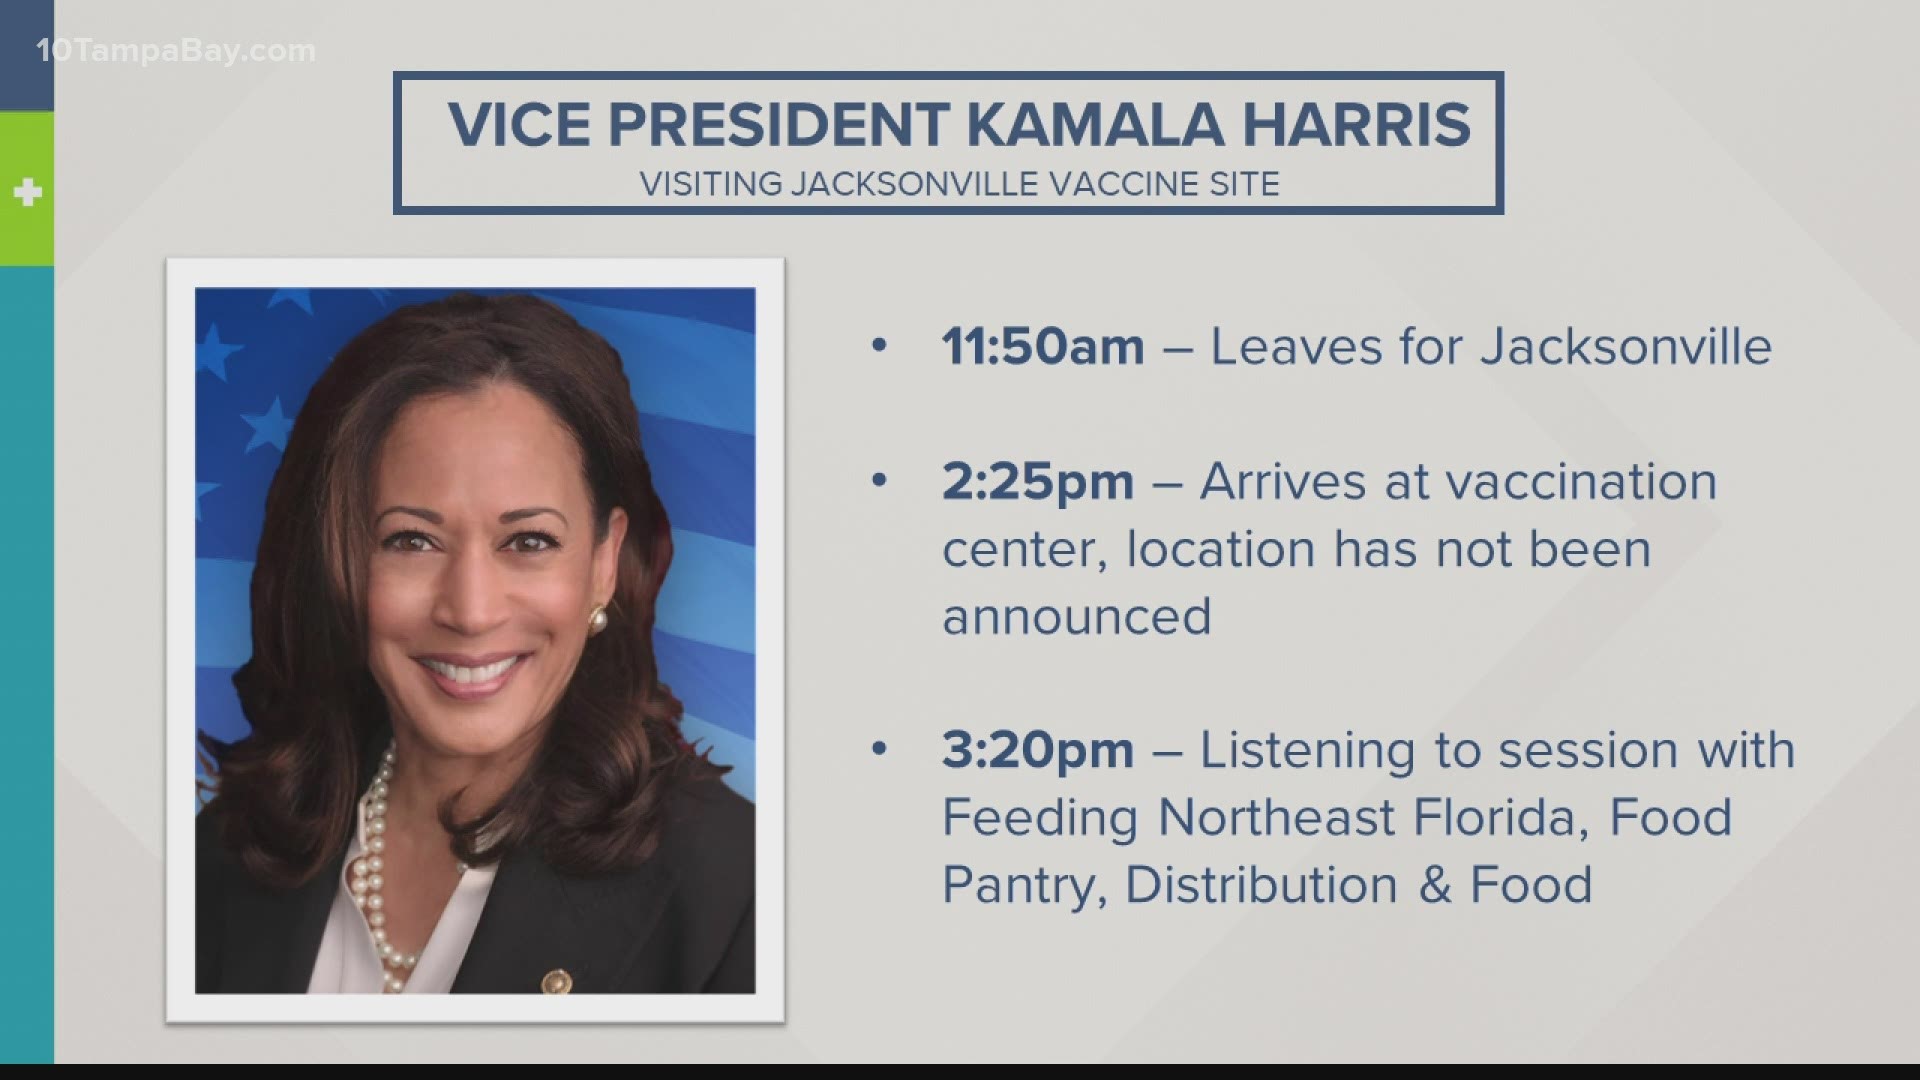 The trip is part of Vice President Harris and President Joe Biden's "Help is Here" tour, a cross-country effort highlighting the $1.9 trillion COVID-19 relief plan.